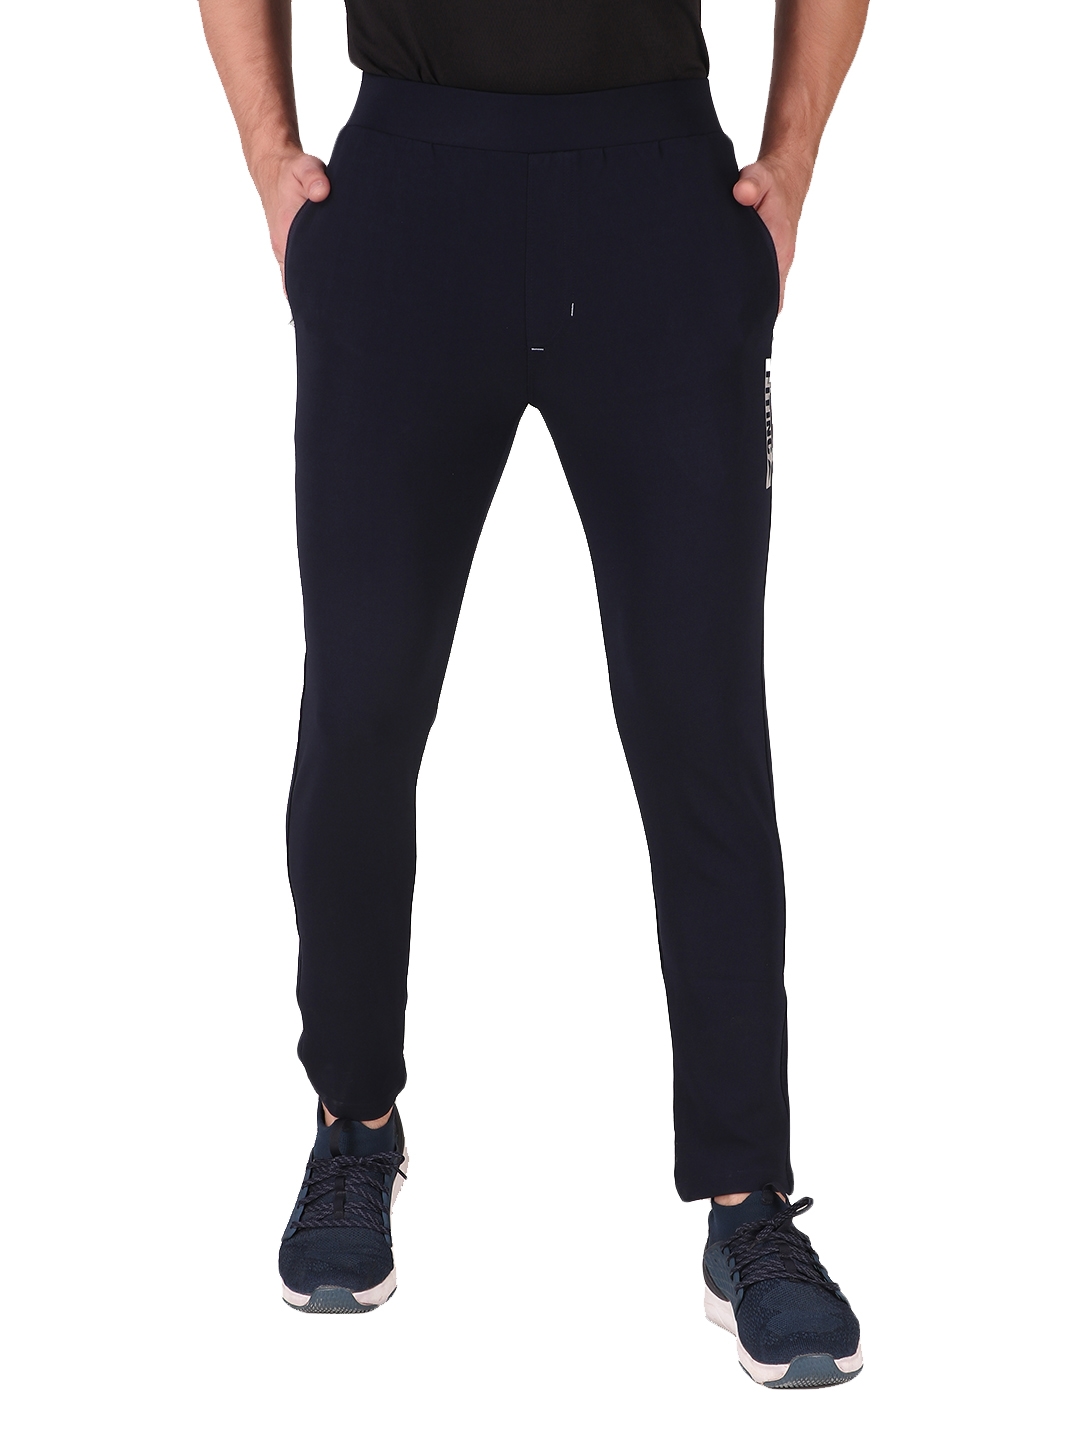 Fitinc Gym Yoga Active Sports Wear Navy Blue Sweat Track Pants for Men